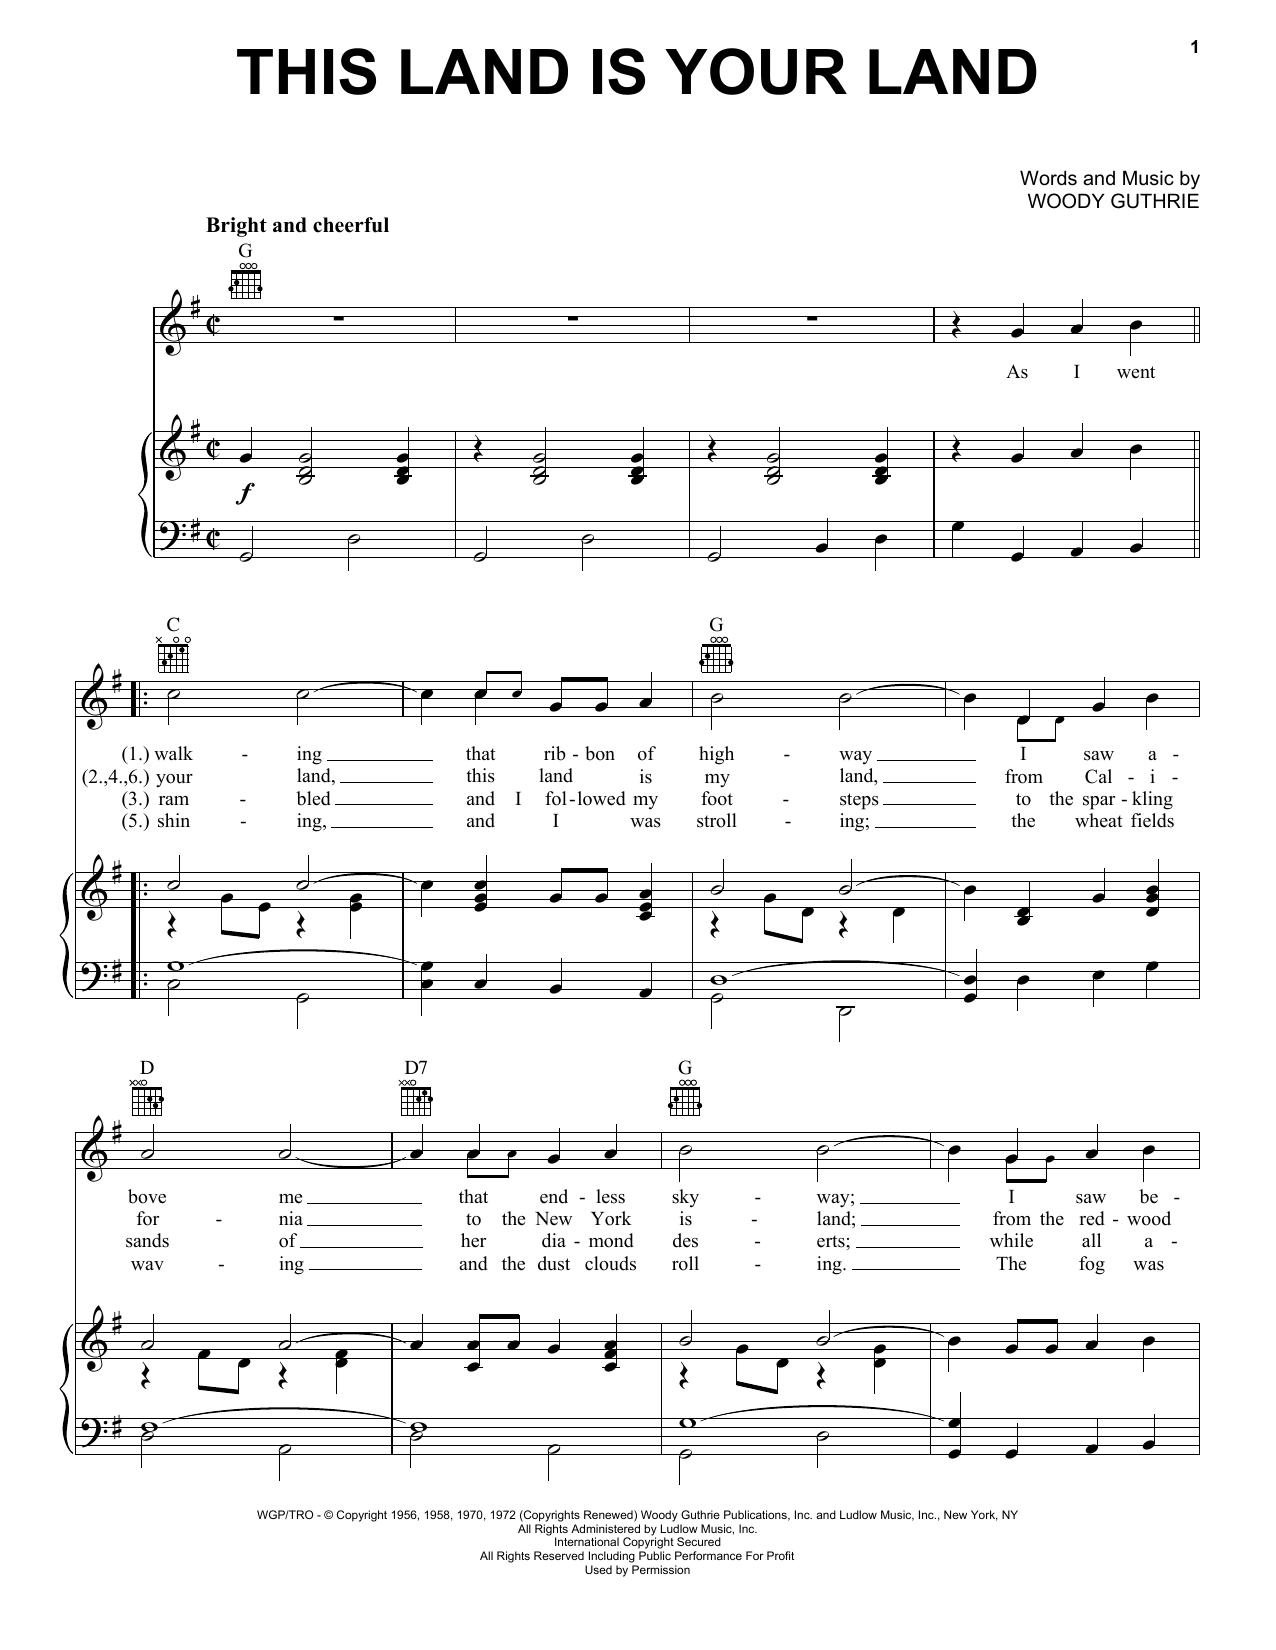 Download Woody Guthrie This Land Is Your Land Sheet Music